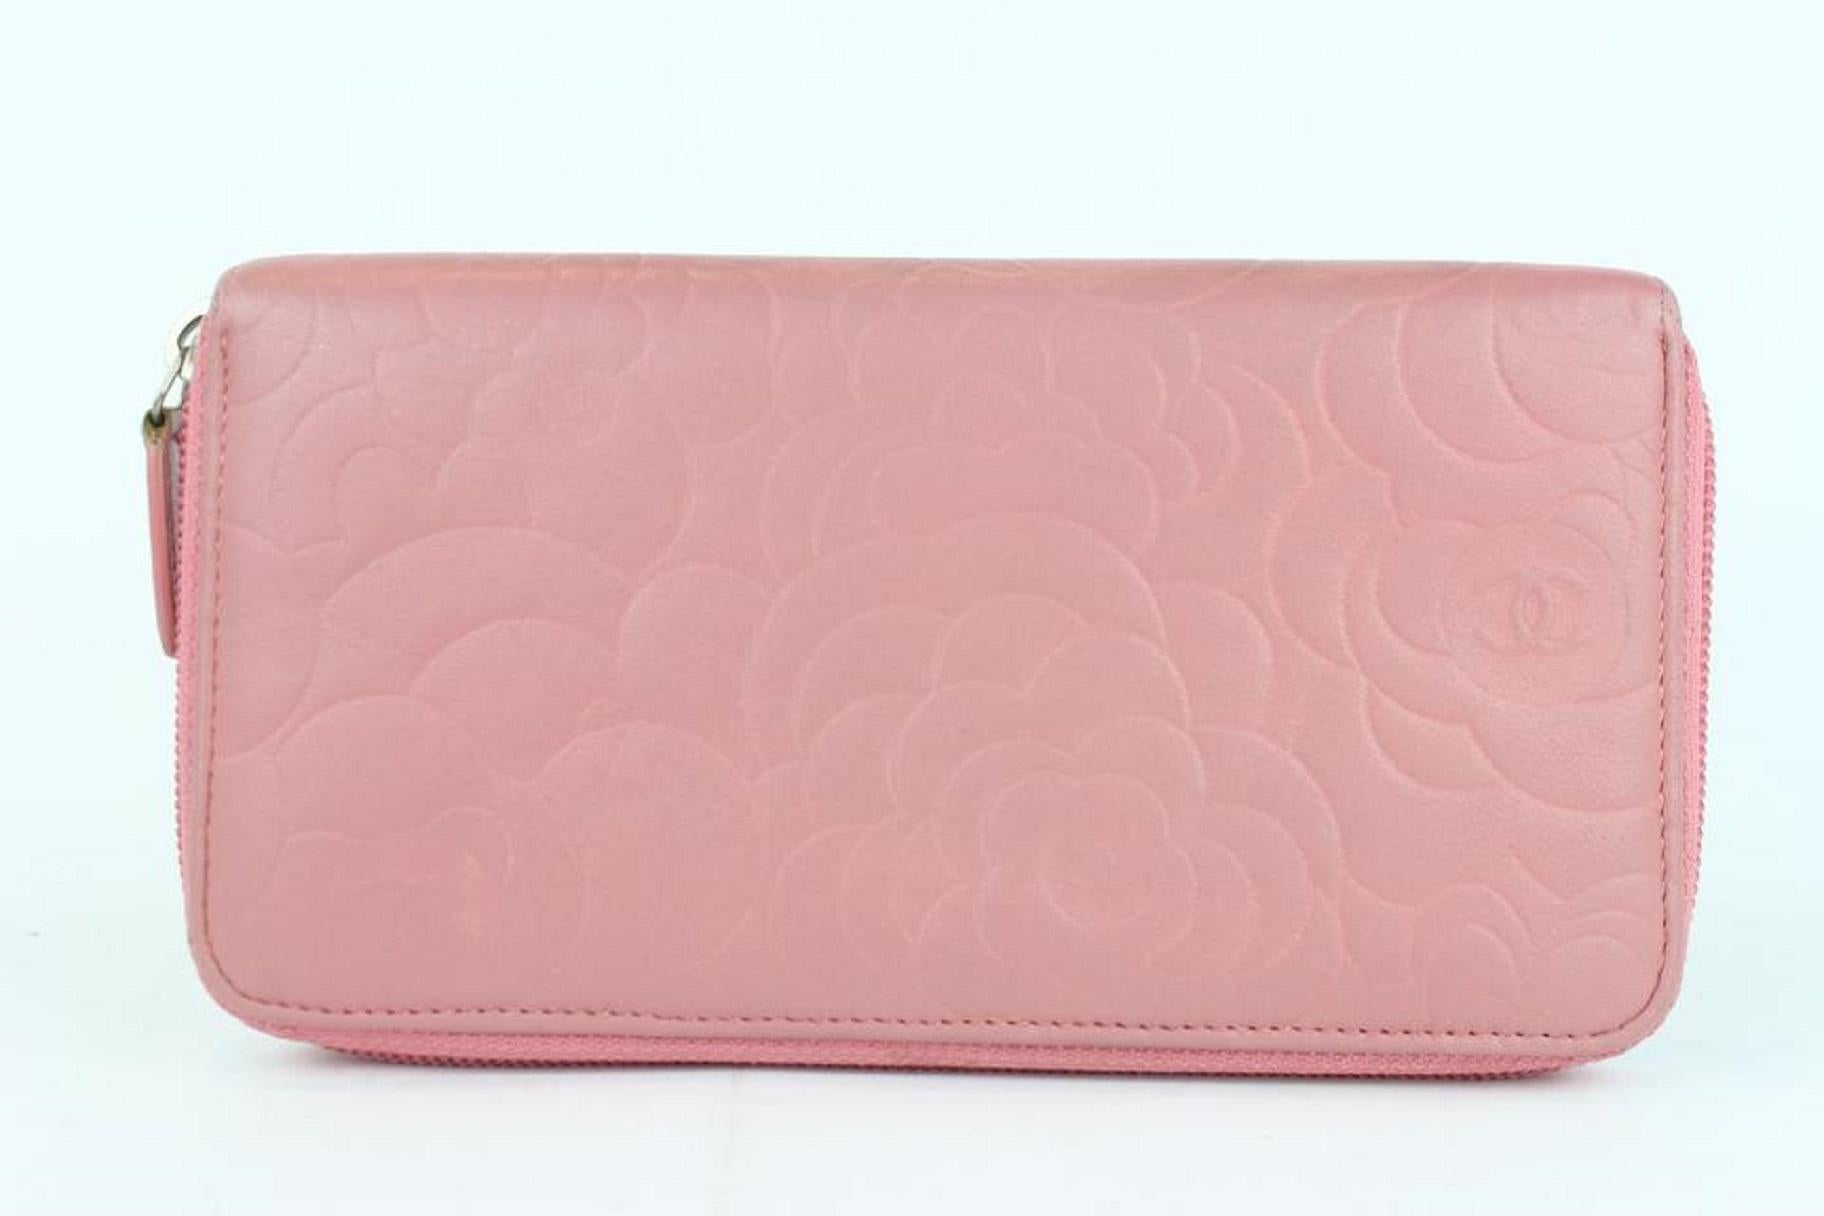 Chanel Embossed Camellia Gusset Zip Around Wallet 2cj1110 Pink Leather Clutch For Sale 3